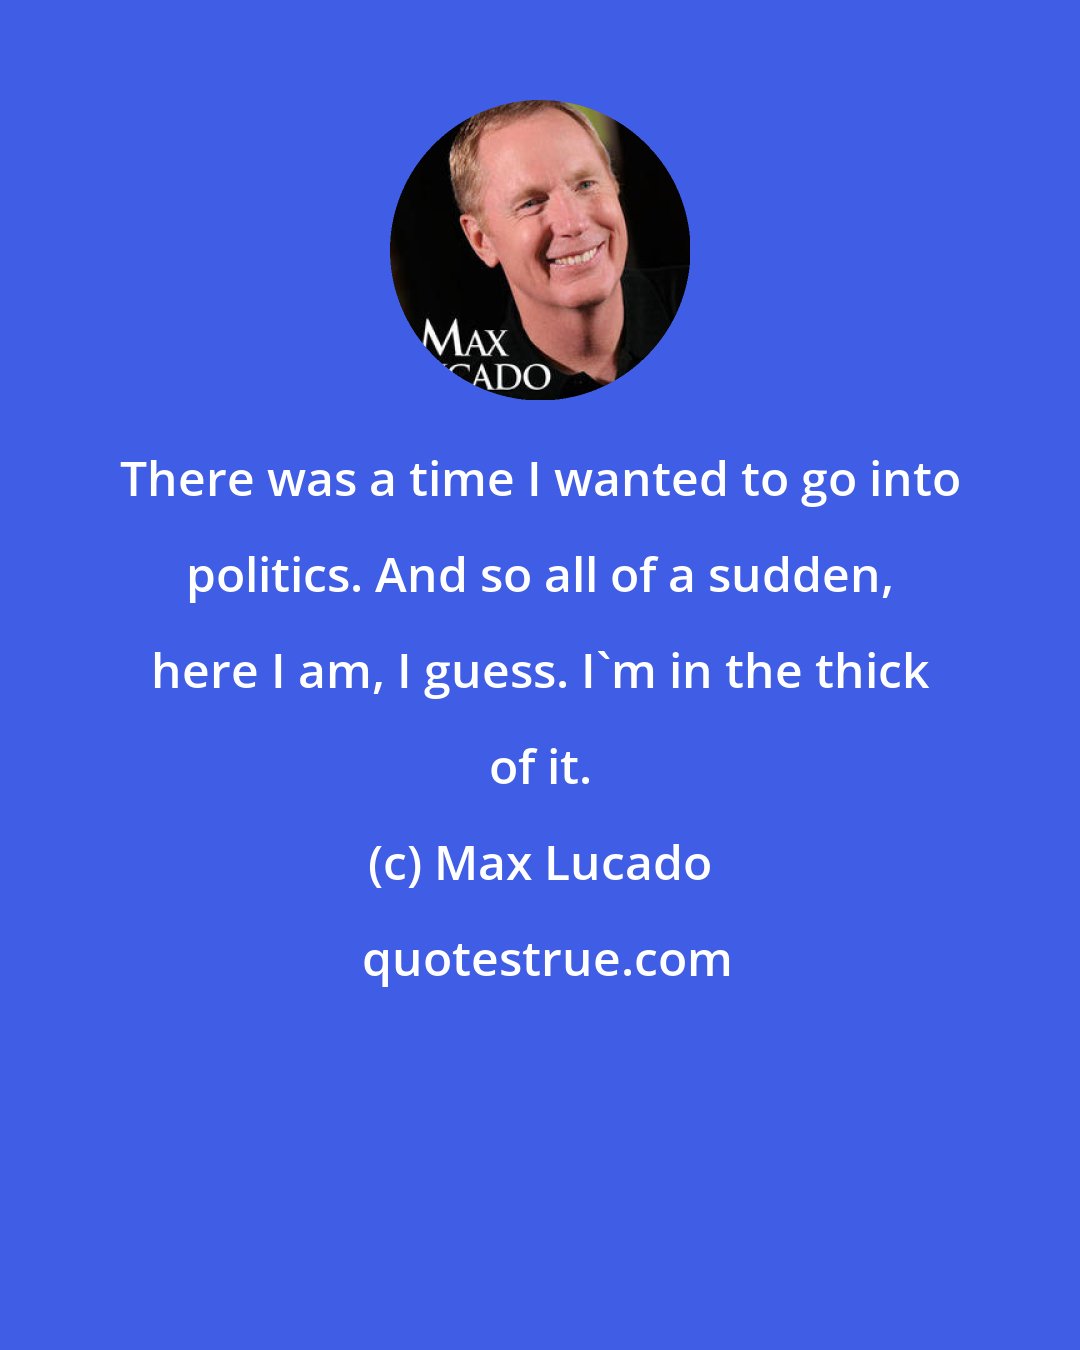 Max Lucado: There was a time I wanted to go into politics. And so all of a sudden, here I am, I guess. I'm in the thick of it.